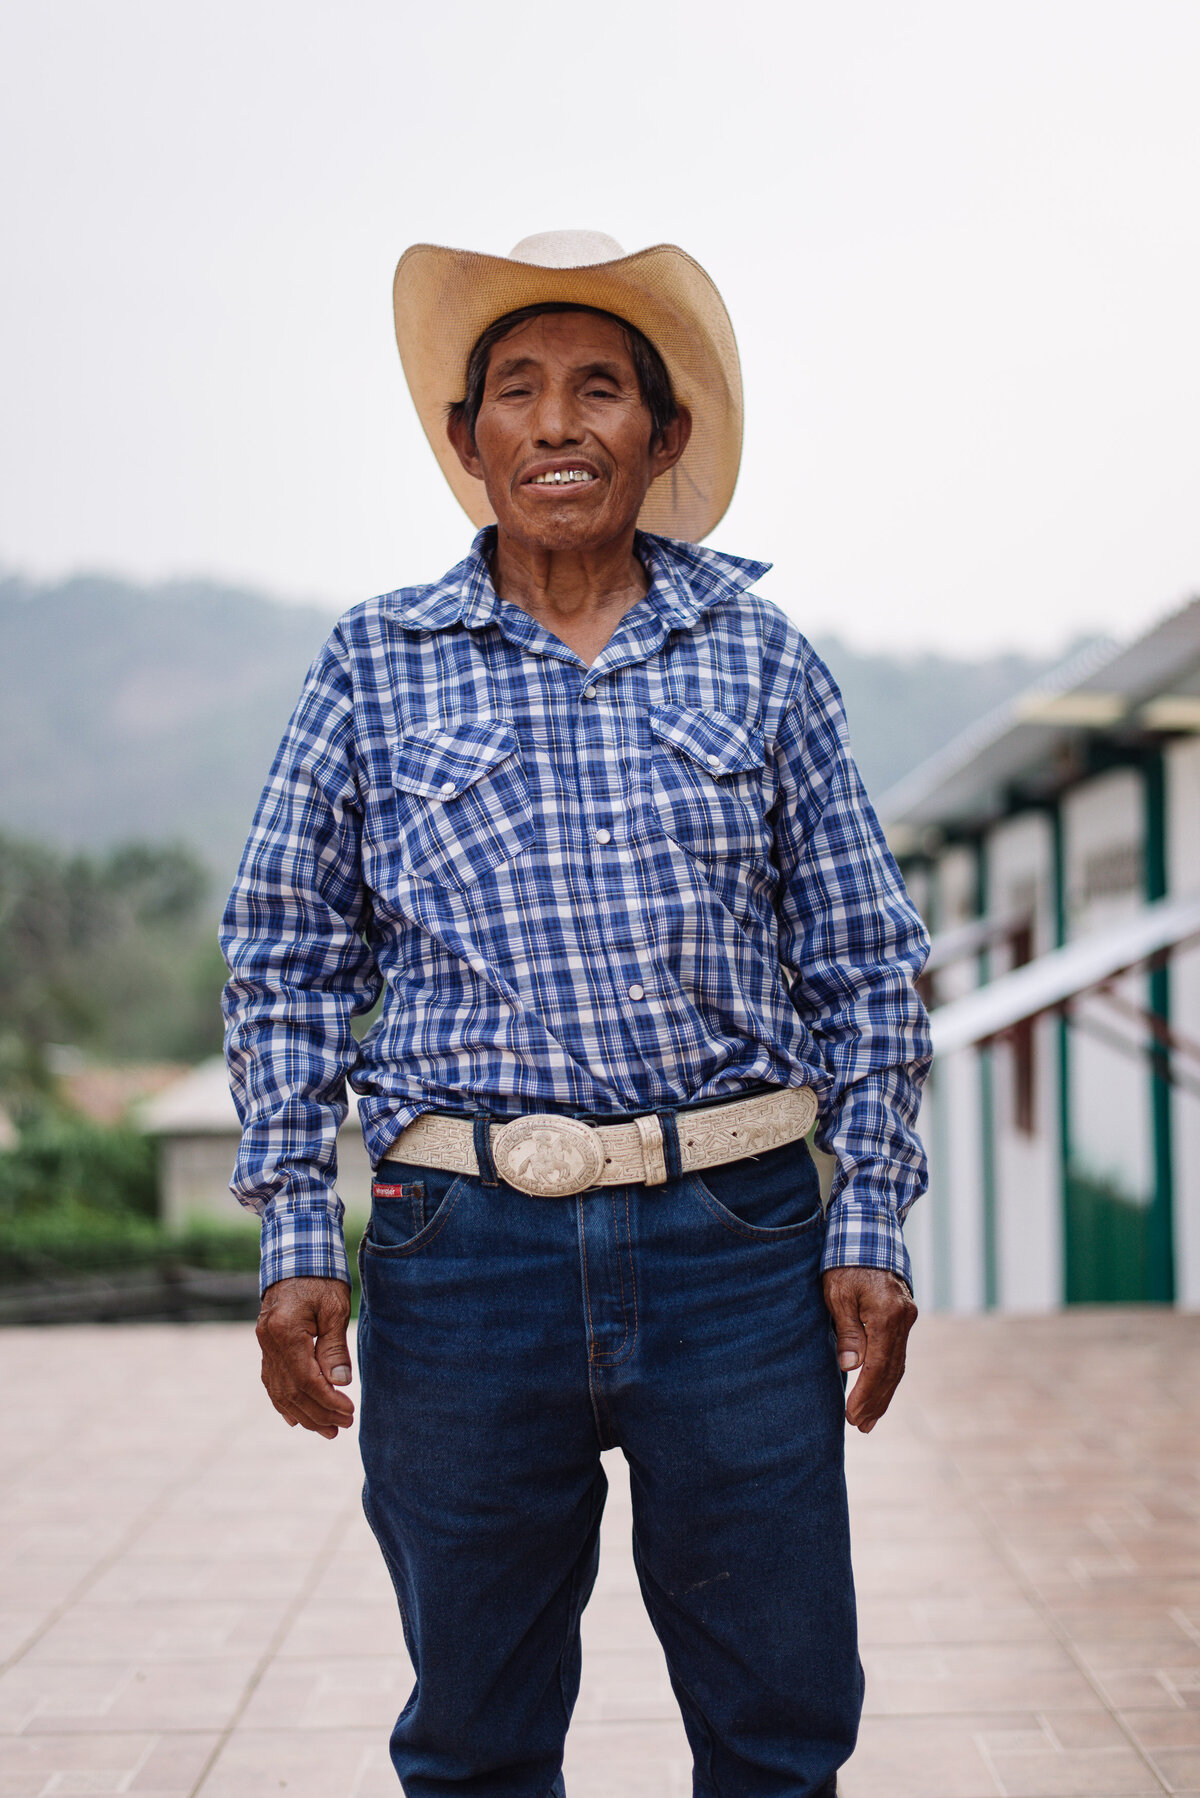 coffee farmer looks into gaze of camera wearing blue jeans and checkered shirt for Food 4 Farmers no profit